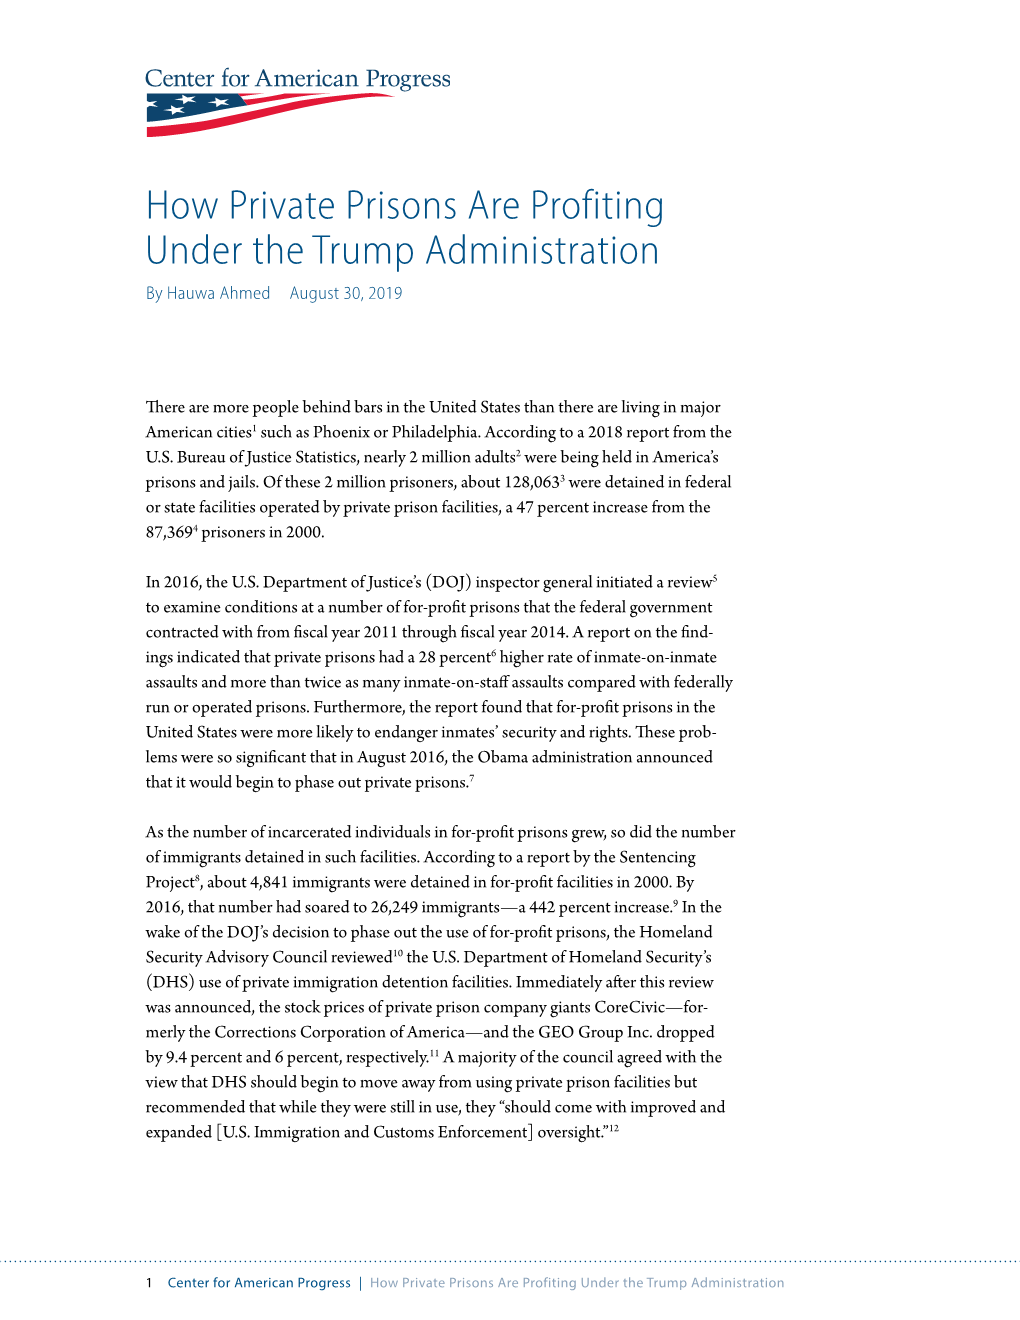 How Private Prisons Are Profiting Under the Trump Administration by Hauwa Ahmed August 30, 2019